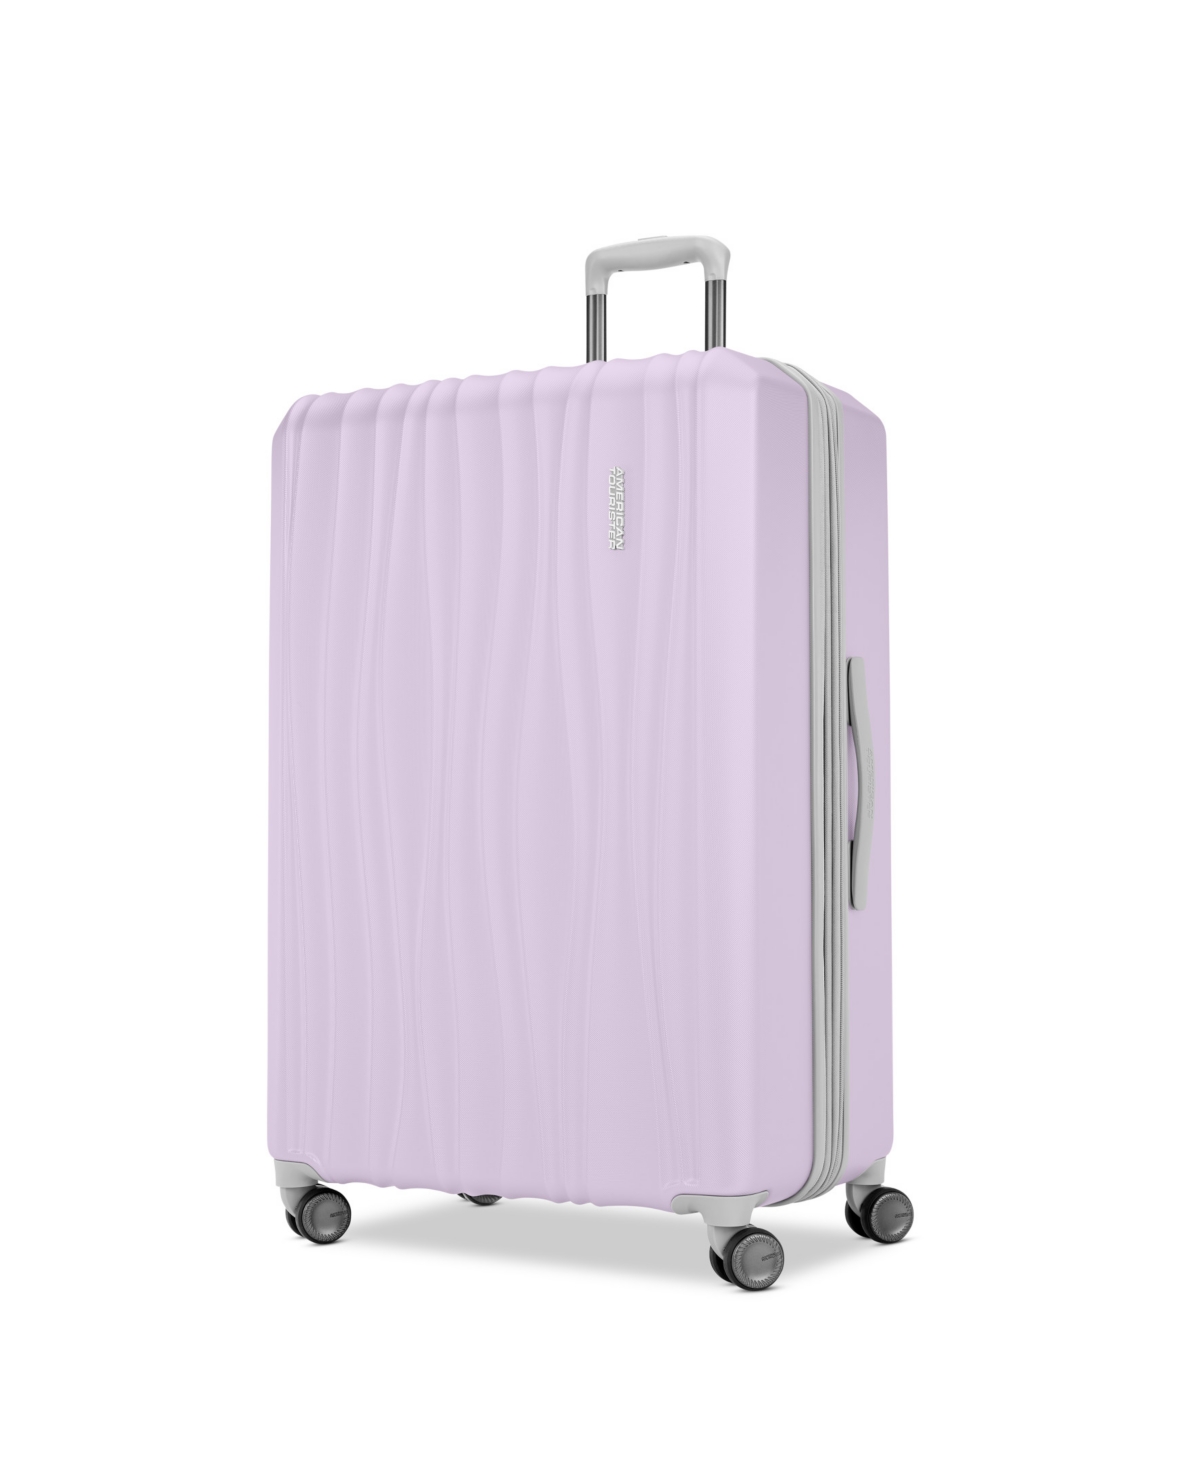 American Tourister Tribute Encore Hardside Check-in 28" Spinner Luggage In Icy Lilac